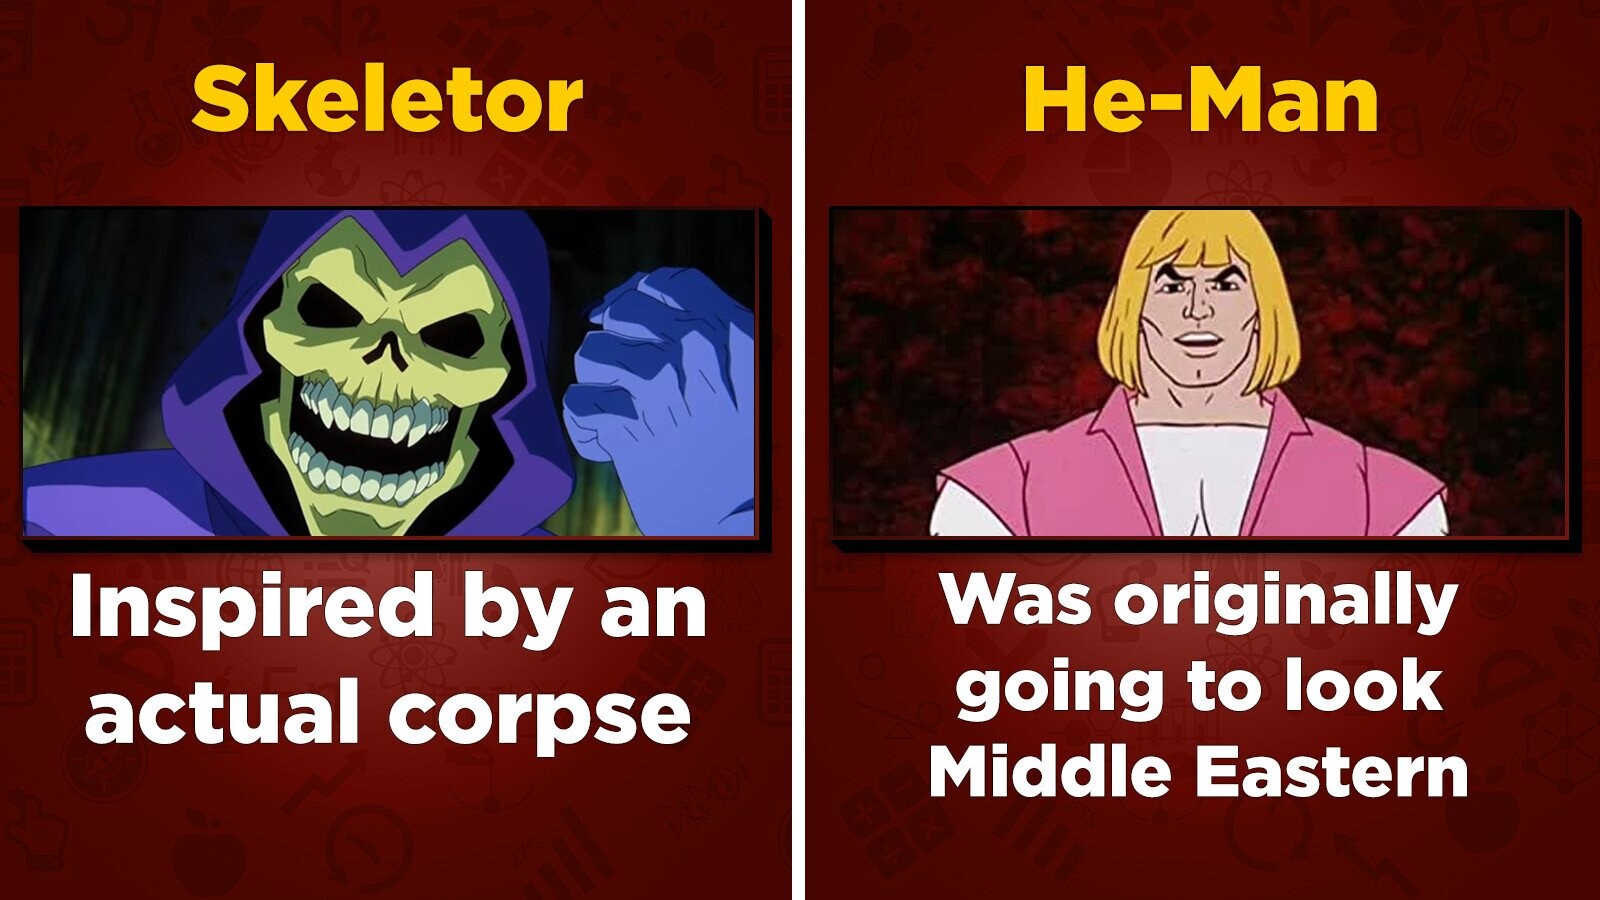 By The Power Of Grayskull: 15 Rad Facts About The Masters Of The Universe Franchise